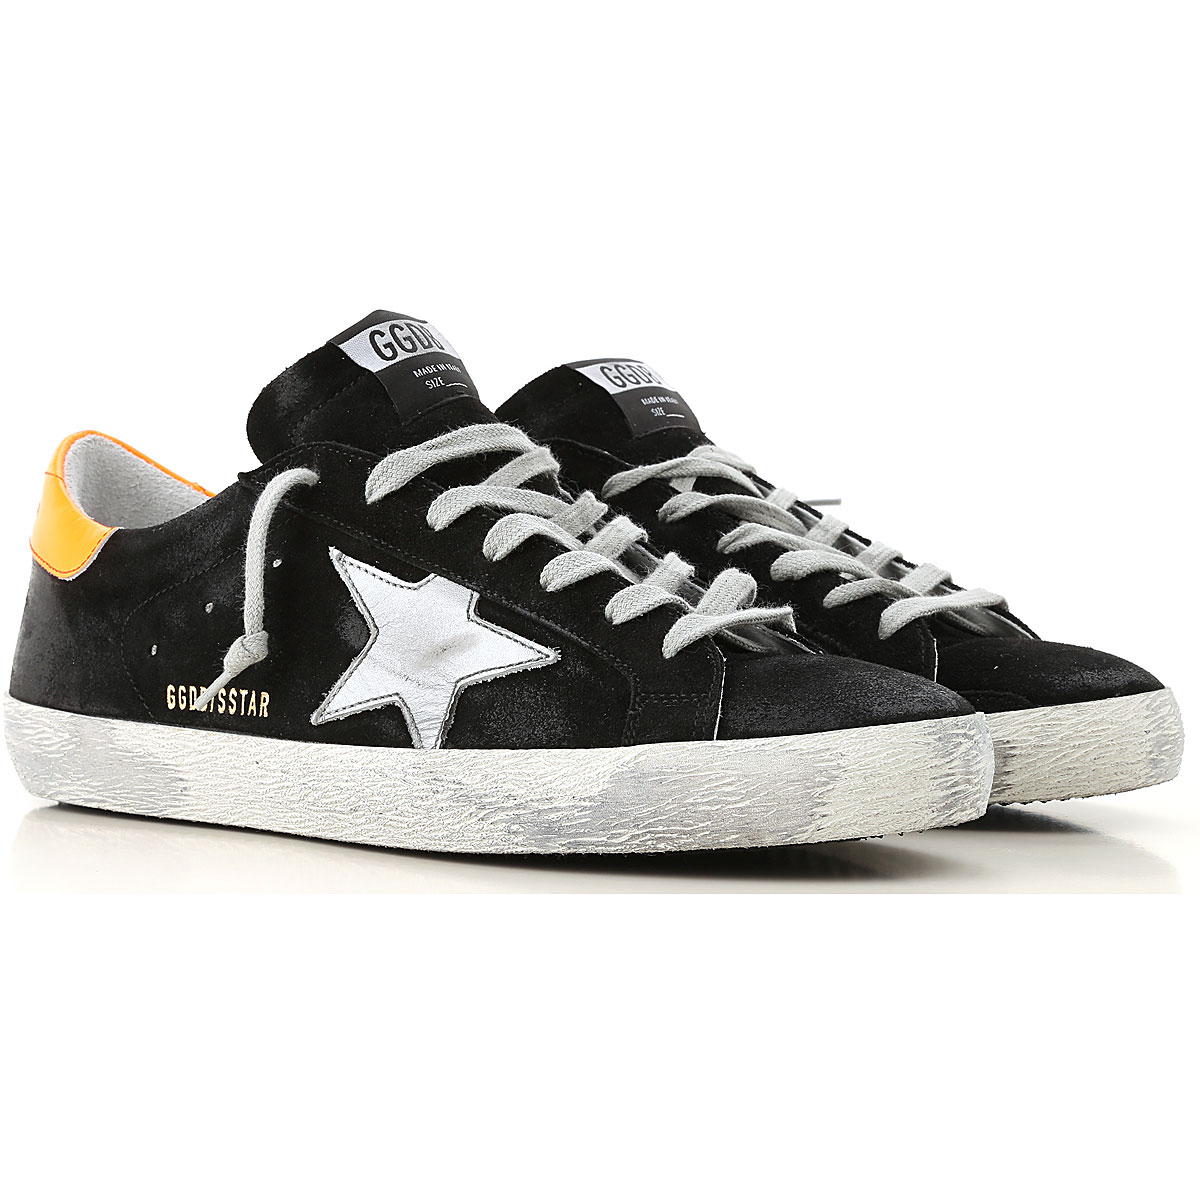 Mens Shoes Golden Goose, Style code: g34ms590-n36-